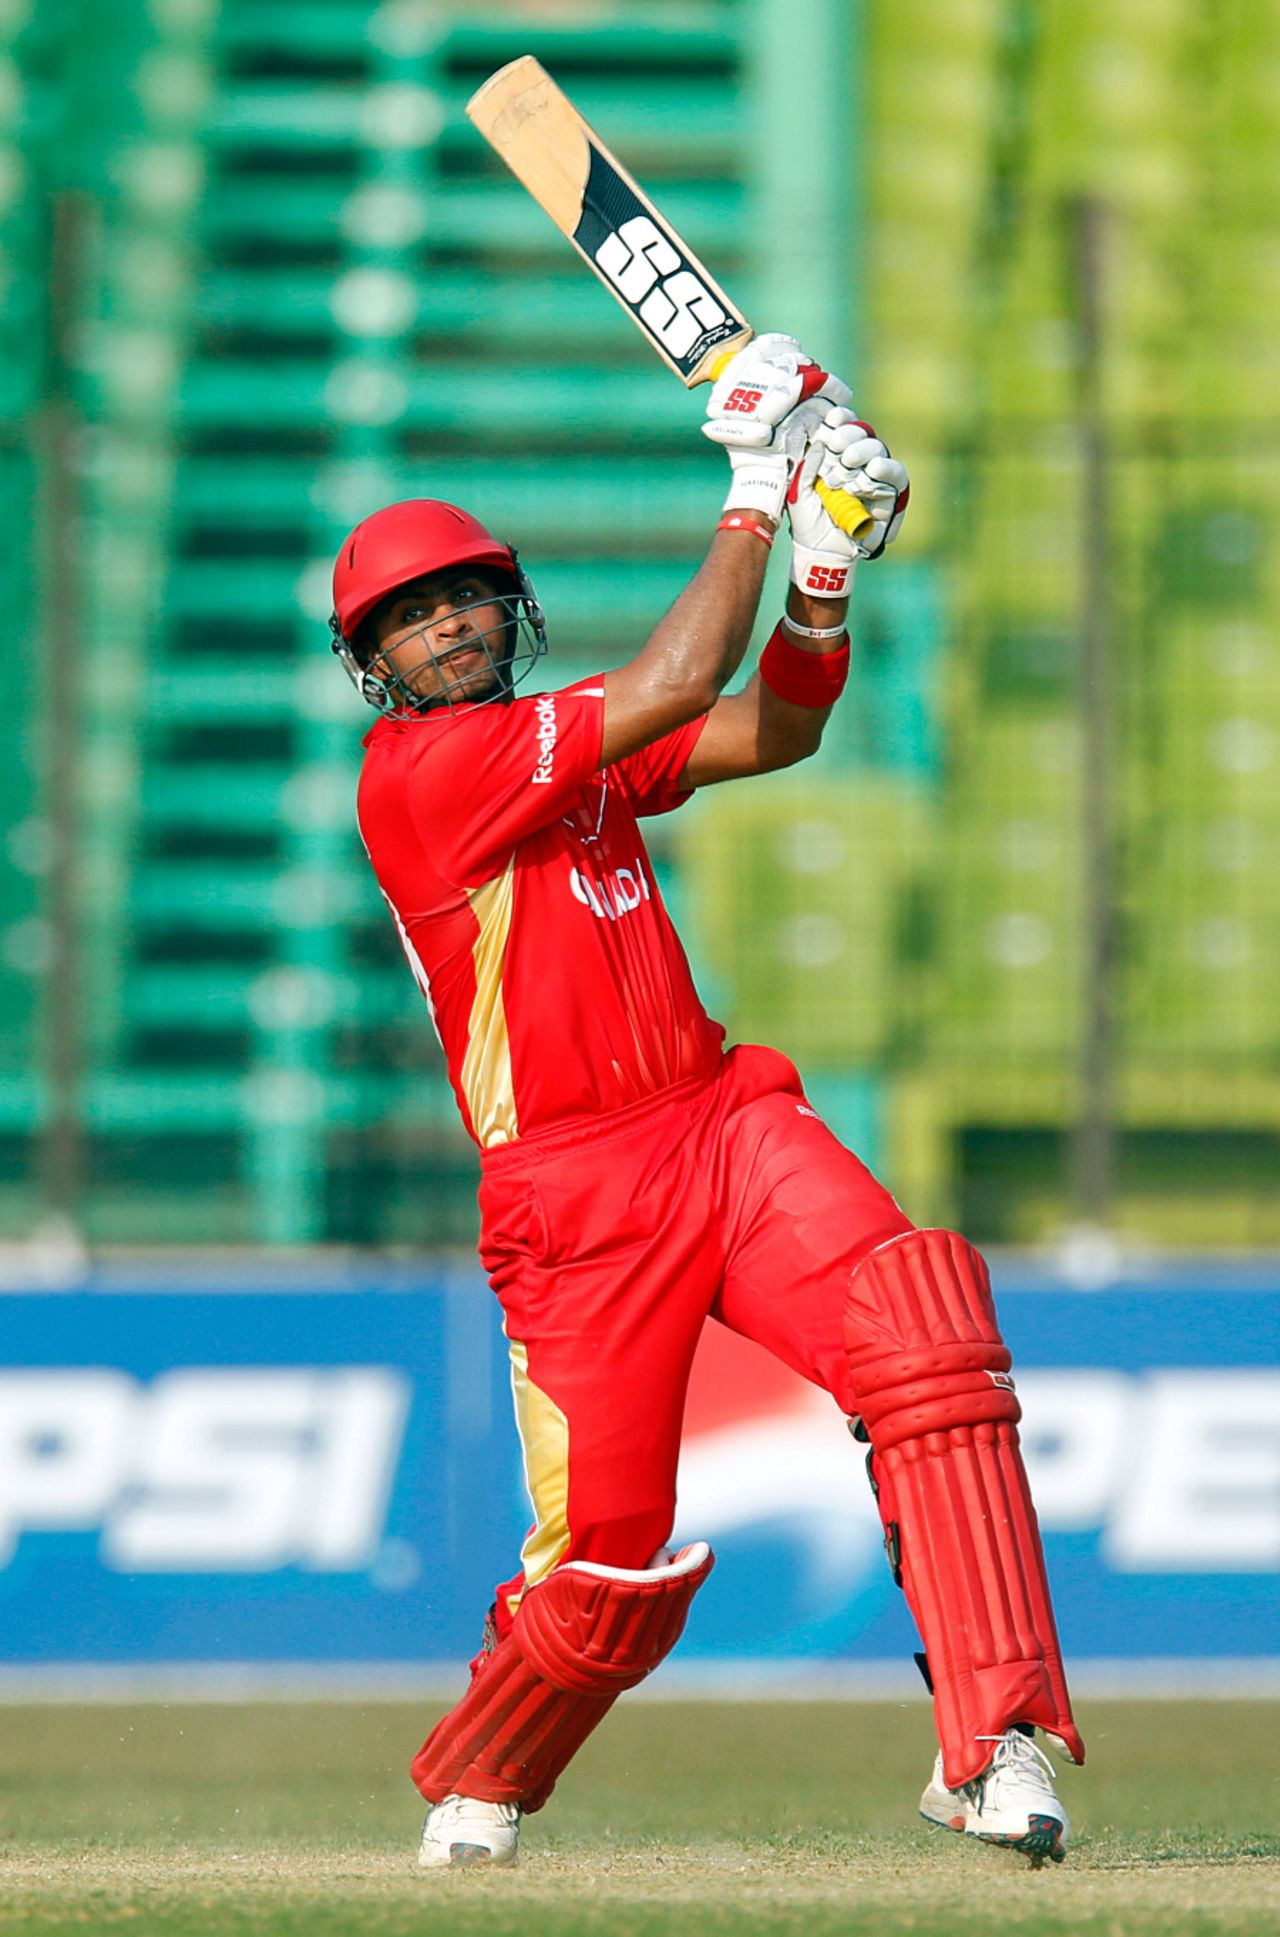 Rizwan Cheema flays one through the off side during his 93, Canada v England, World Cup warm-up match, Fatullah, February 16, 2011